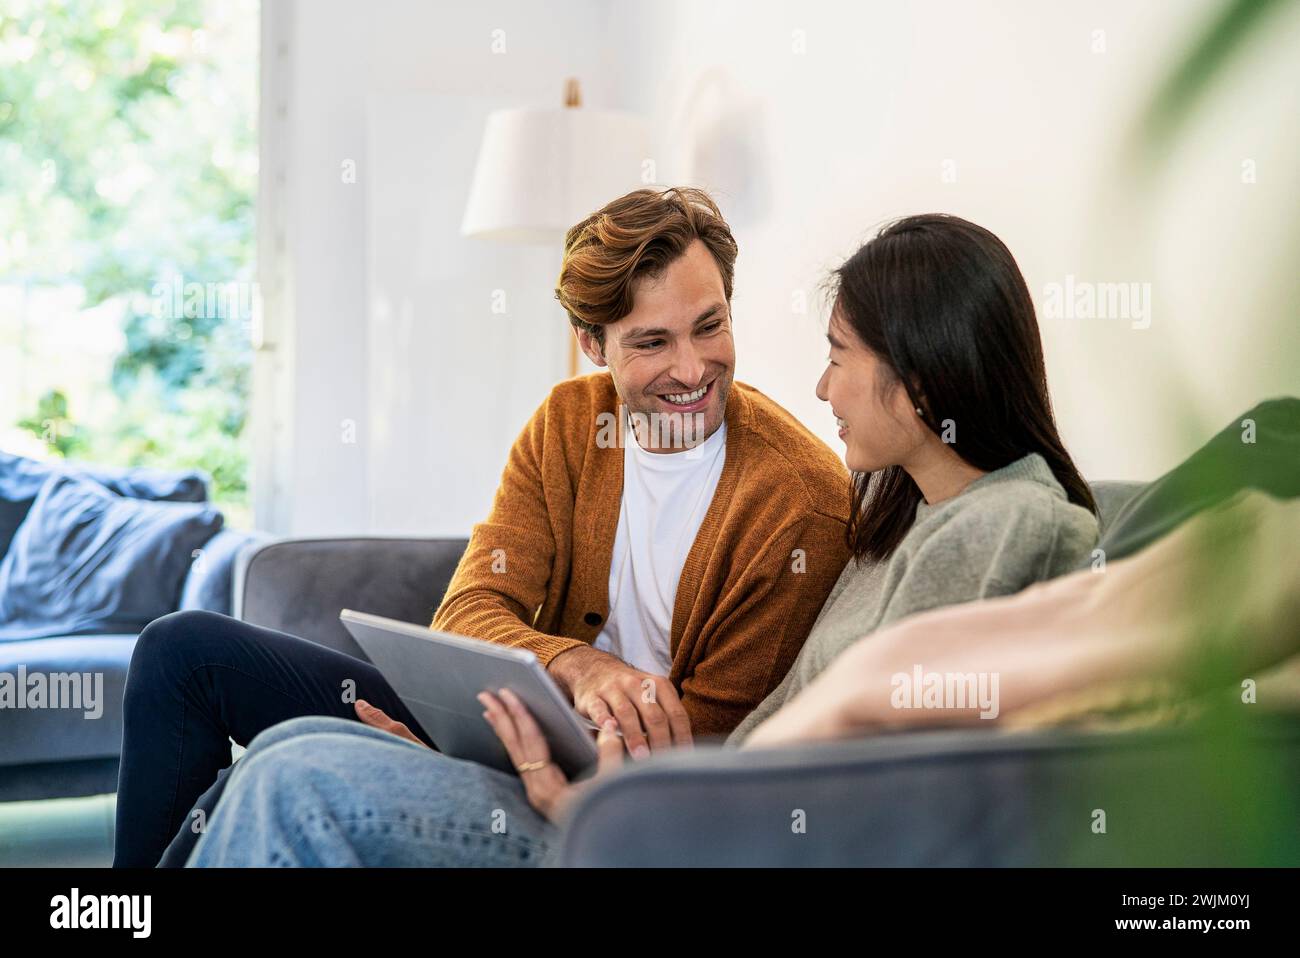 Adult couple having fun while using digital tablet sitting on sofa Stock Photo